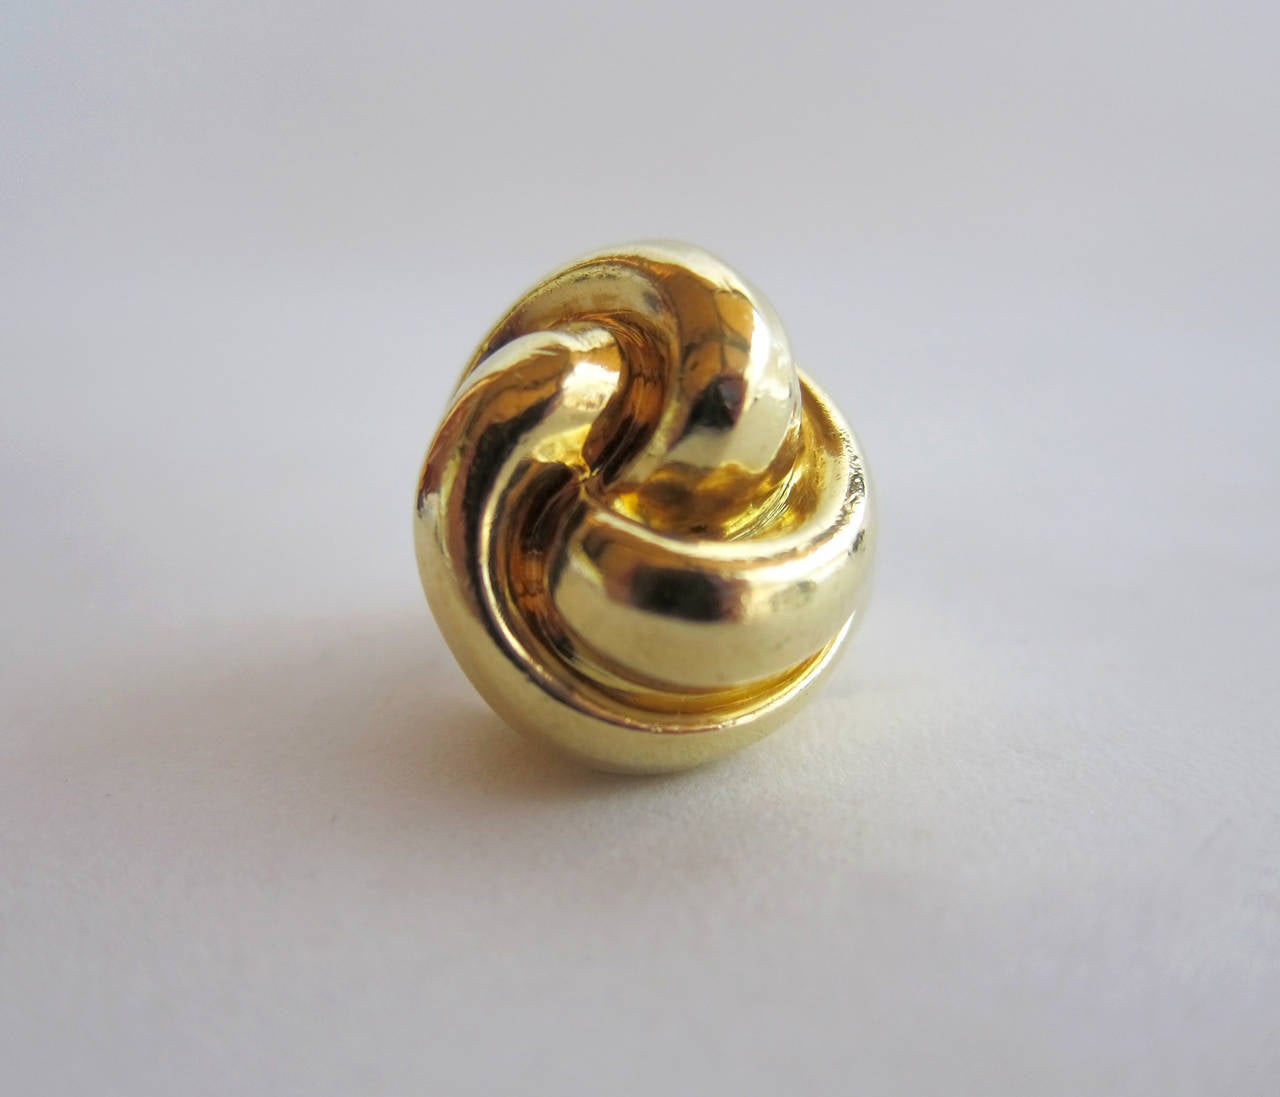 An 18k gold swirled knot cocktail ring by Tiffany & Co., circa 1980's.  Ring is a finger size 5.25 and in very good vintage condition.  Signed Tiffany & Co., 18k.  20.8 grams.